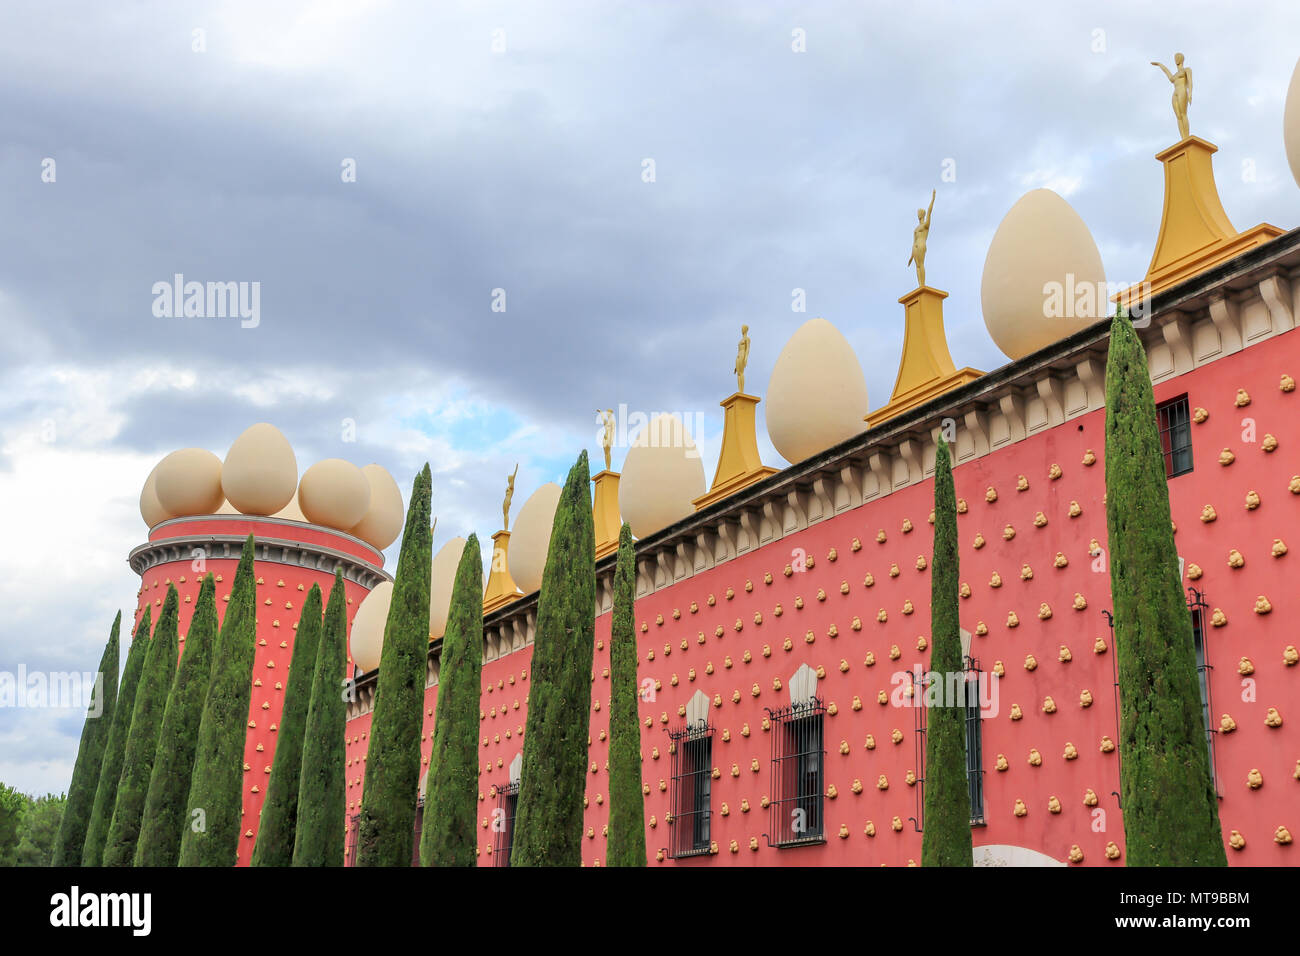 Giant eggs and golden statues lining the roof of the Salvador Dali Theatre Museum in Figueres, Girona, Catelonia, Spain. Stock Photo